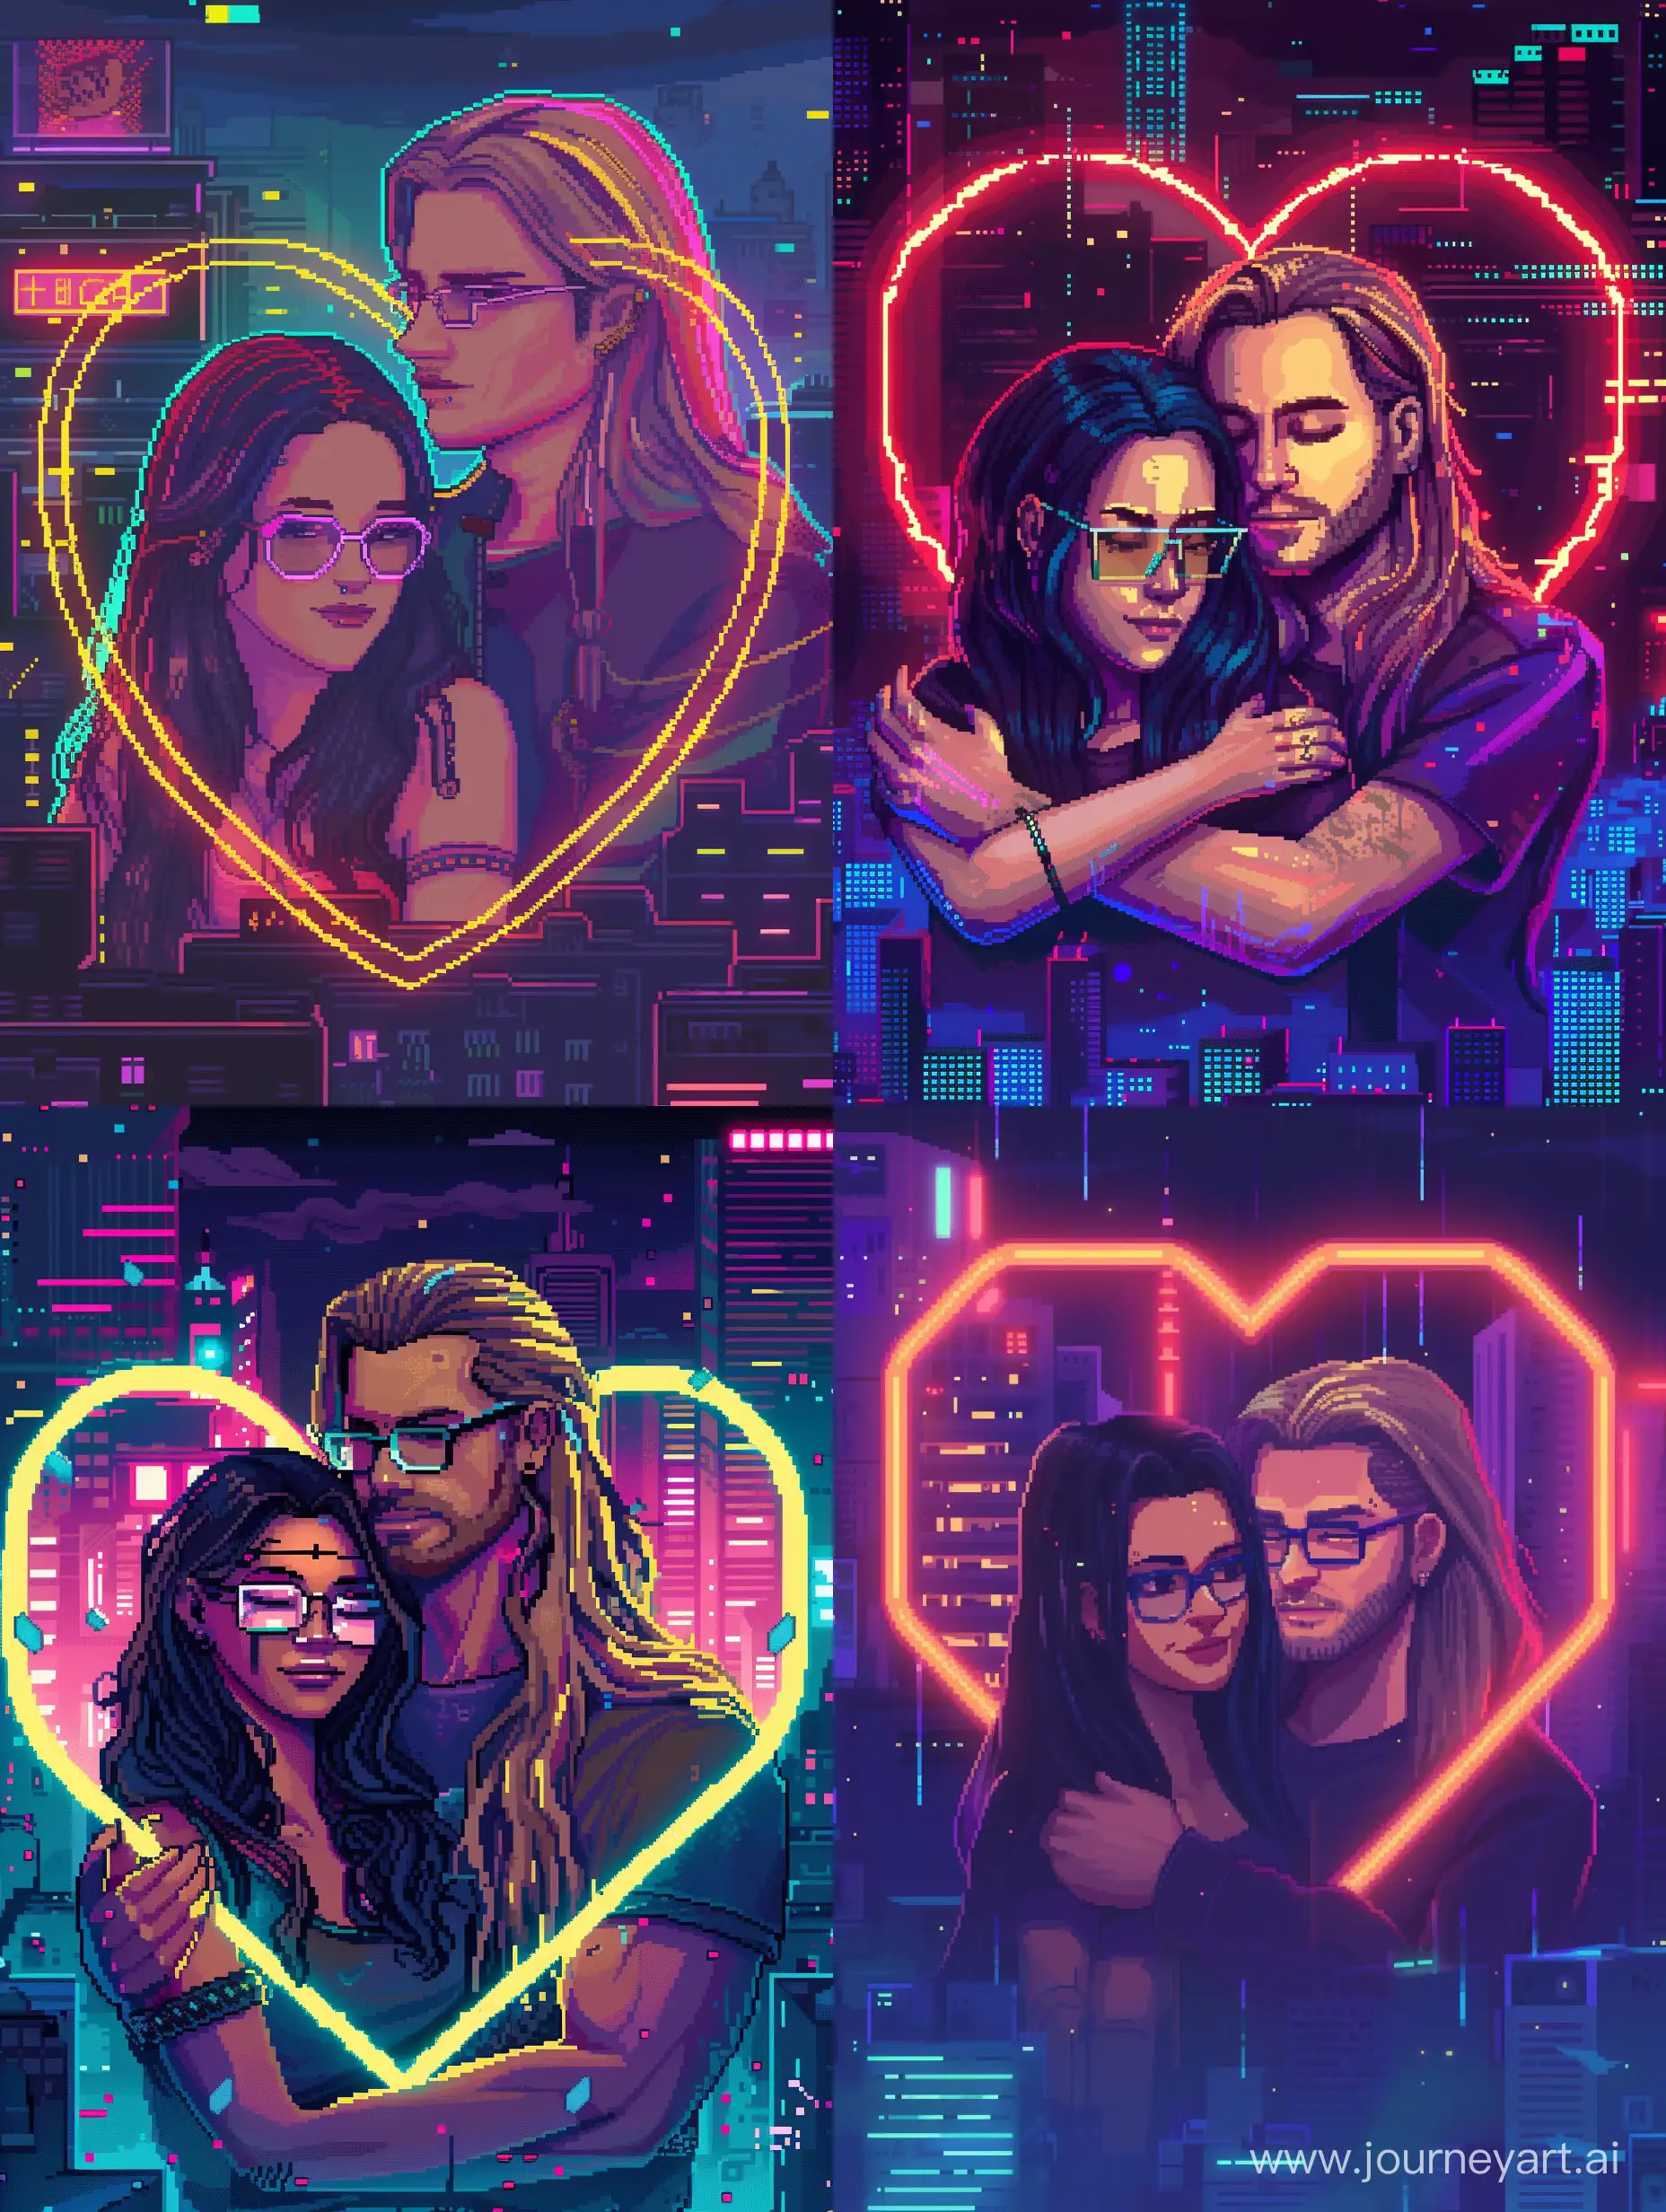 Draw in cyberpunk pixel art style. (Short white girl with long dark hair in glasses with small eyebrow piercing) hugging with (tall white man with long blond hairs).  Put the pair inside a heartshape with neon, night city in background. --v 6 --ar 3:4 --no 3240